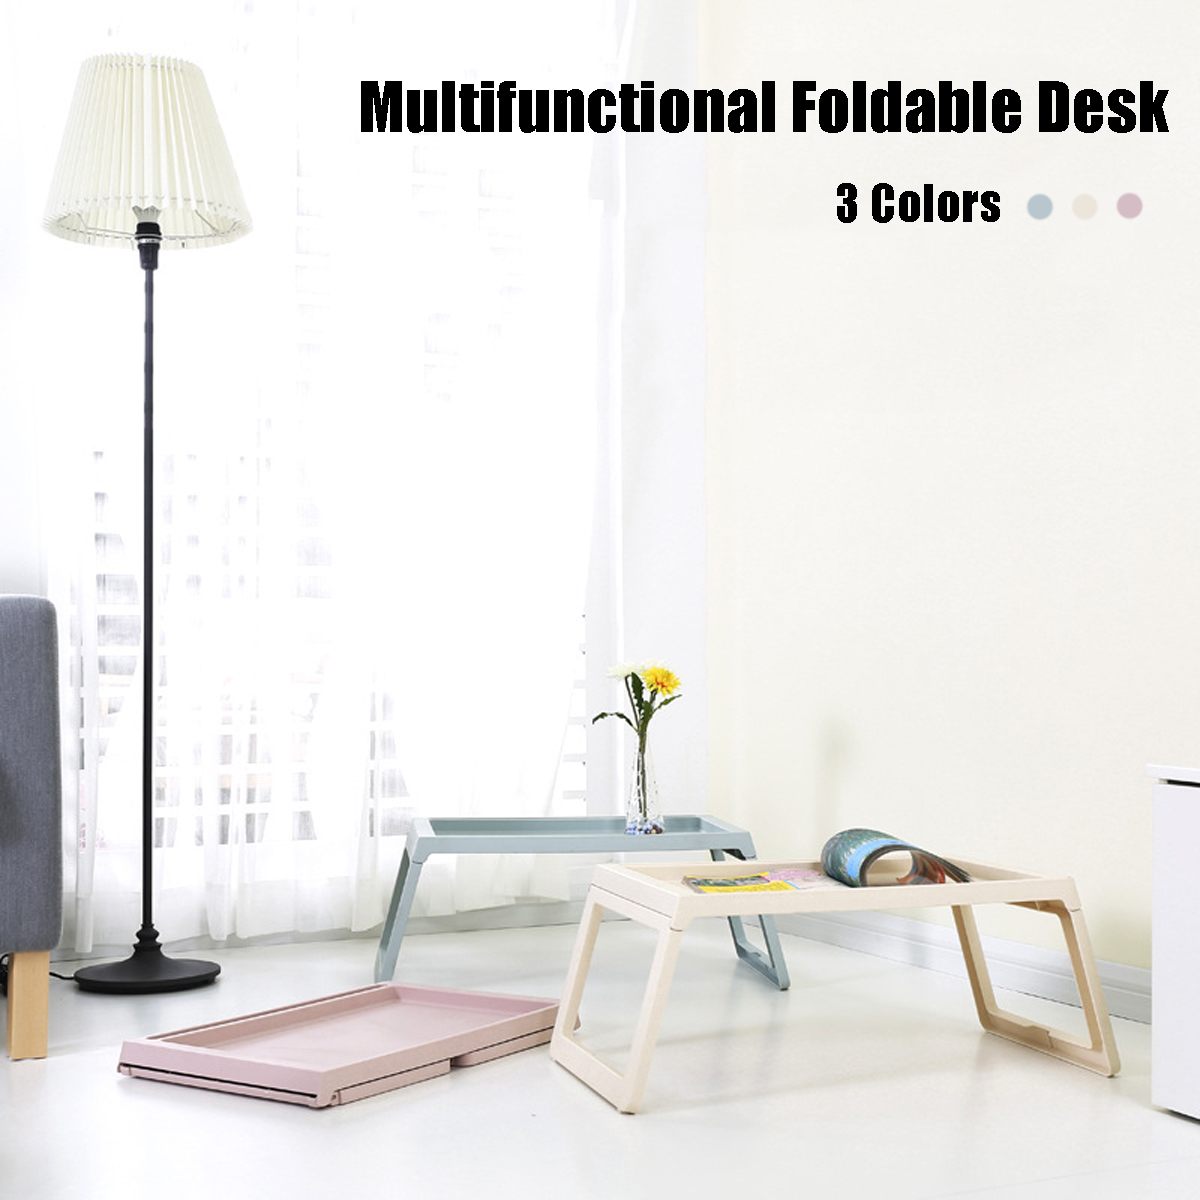 Portable-Foldable-Bedroom-Desk-Laptop-Stand-Lapdesk-Computer-Notebook-Multi-Function-Table-Breakfast-1703336-1